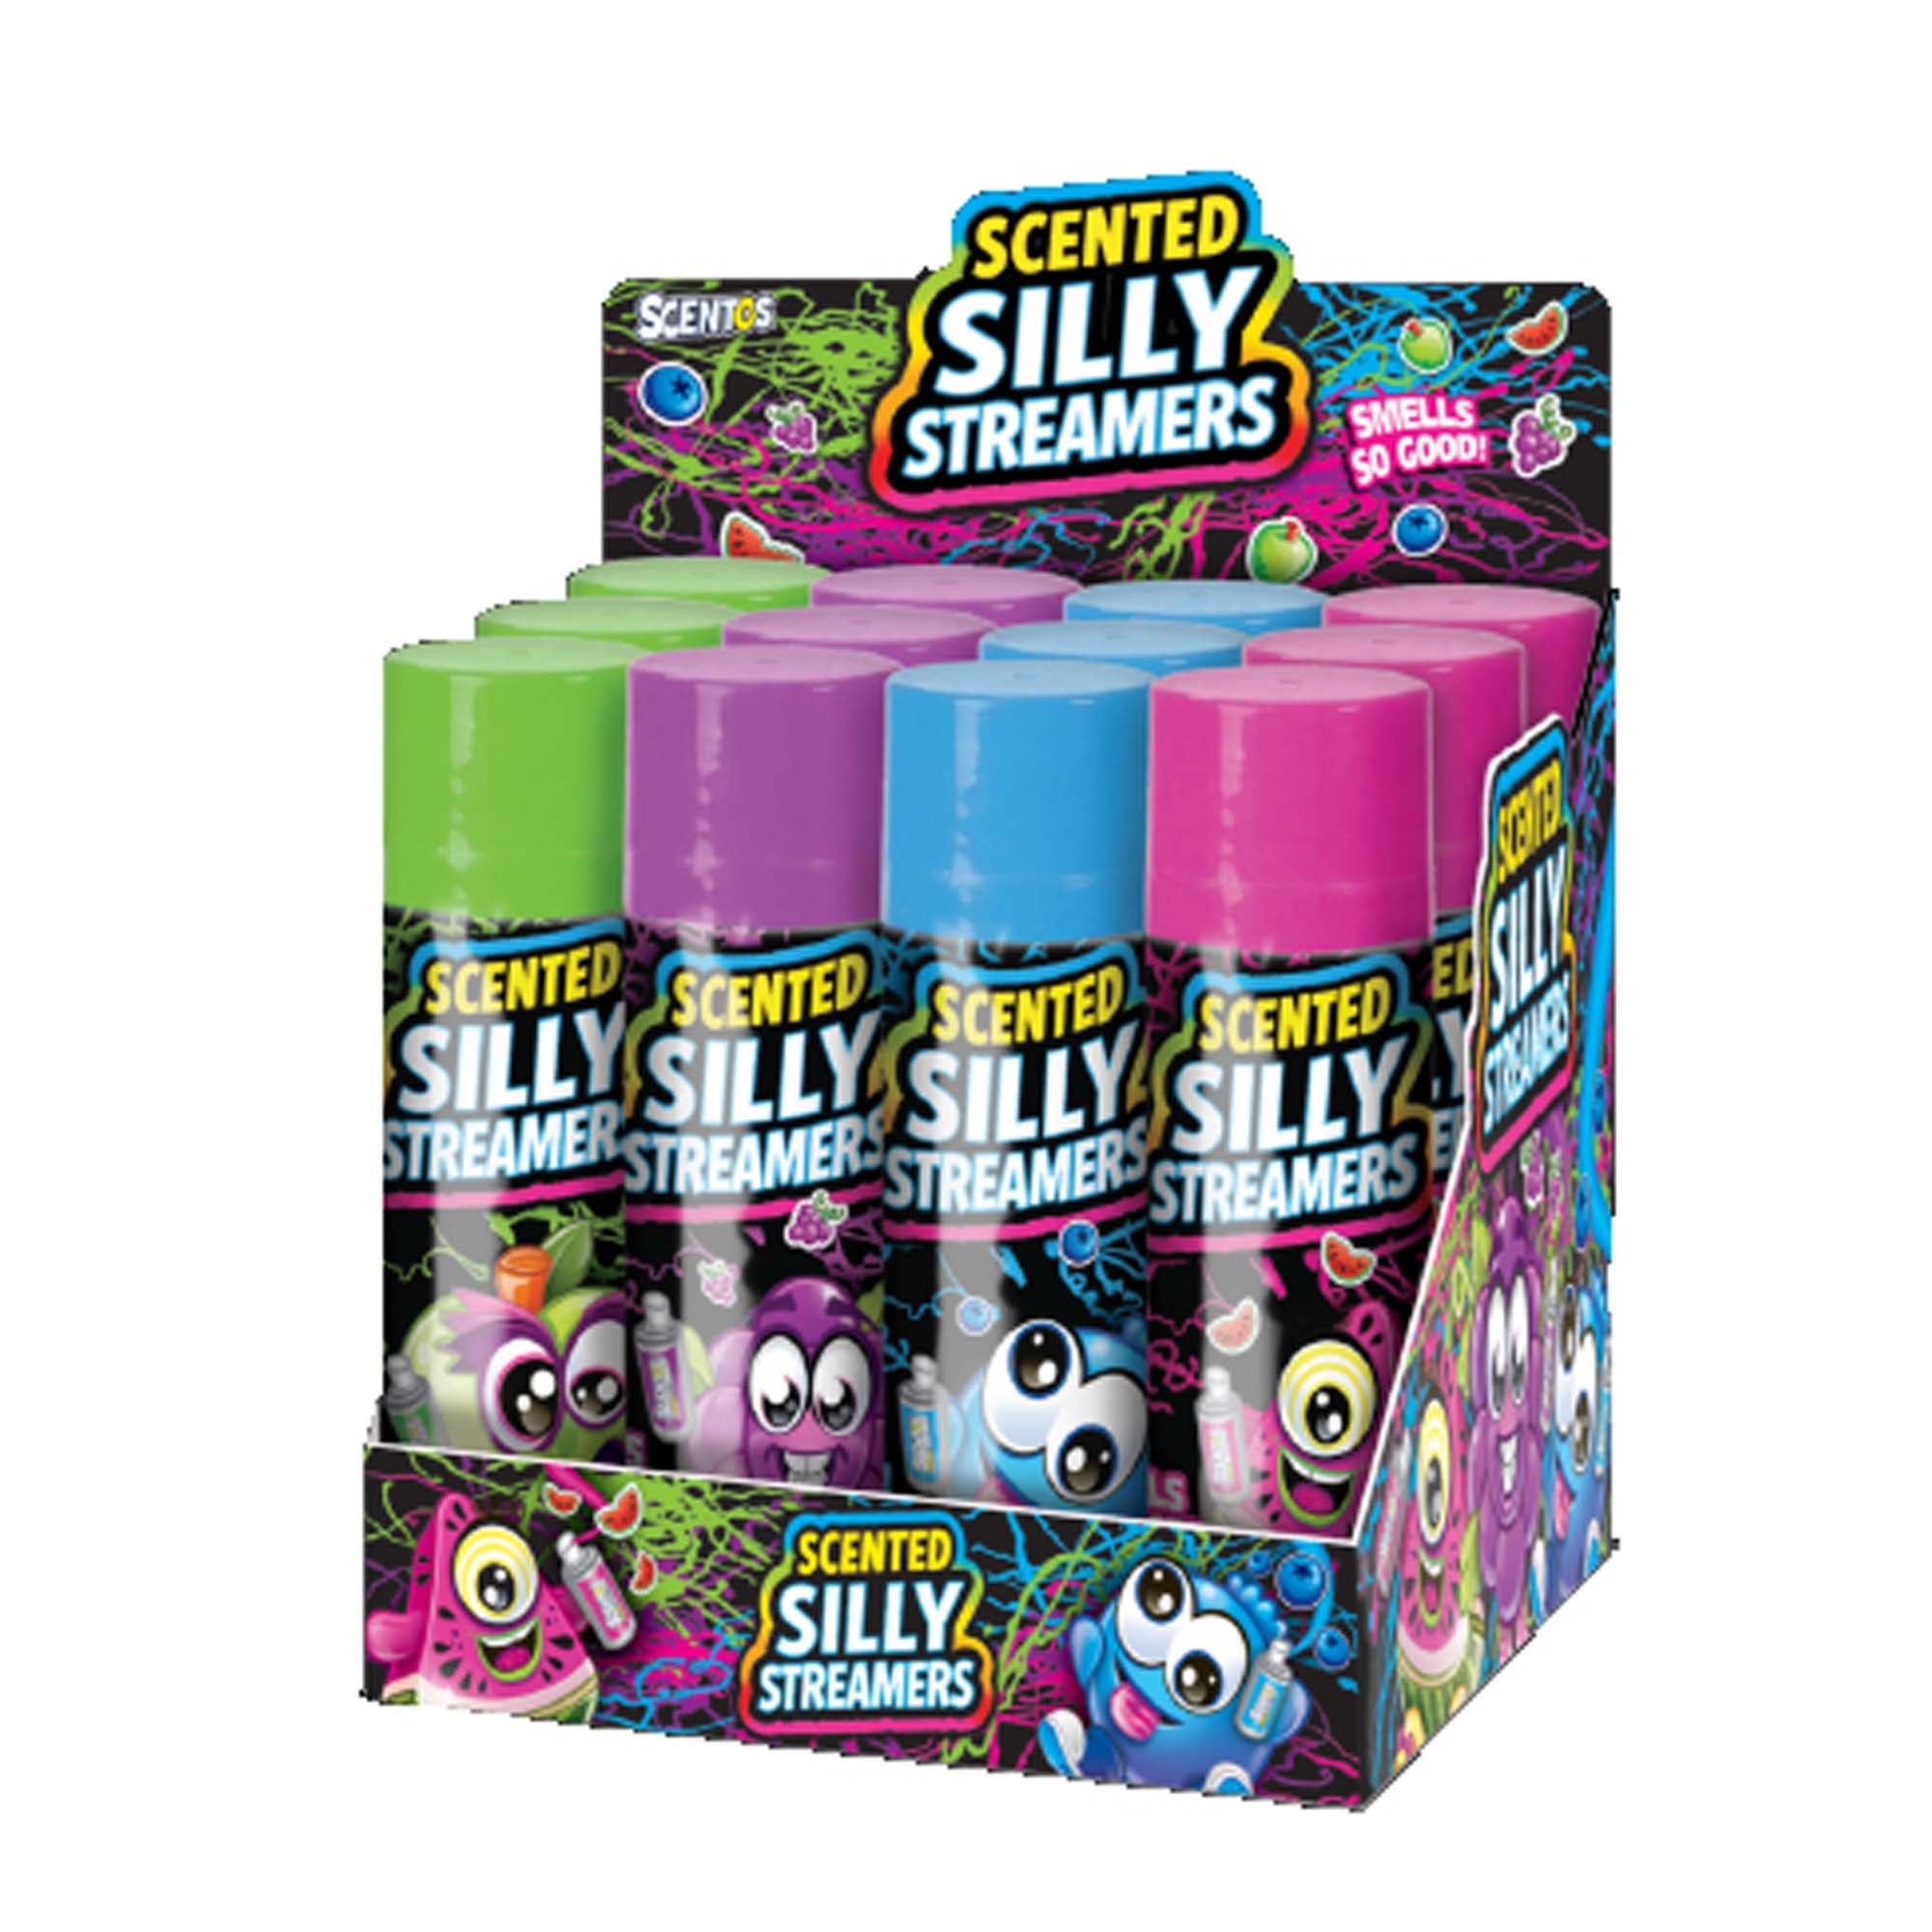 Scentos Scented Silly Strings, 3 Oz, Assortment, 1 Count